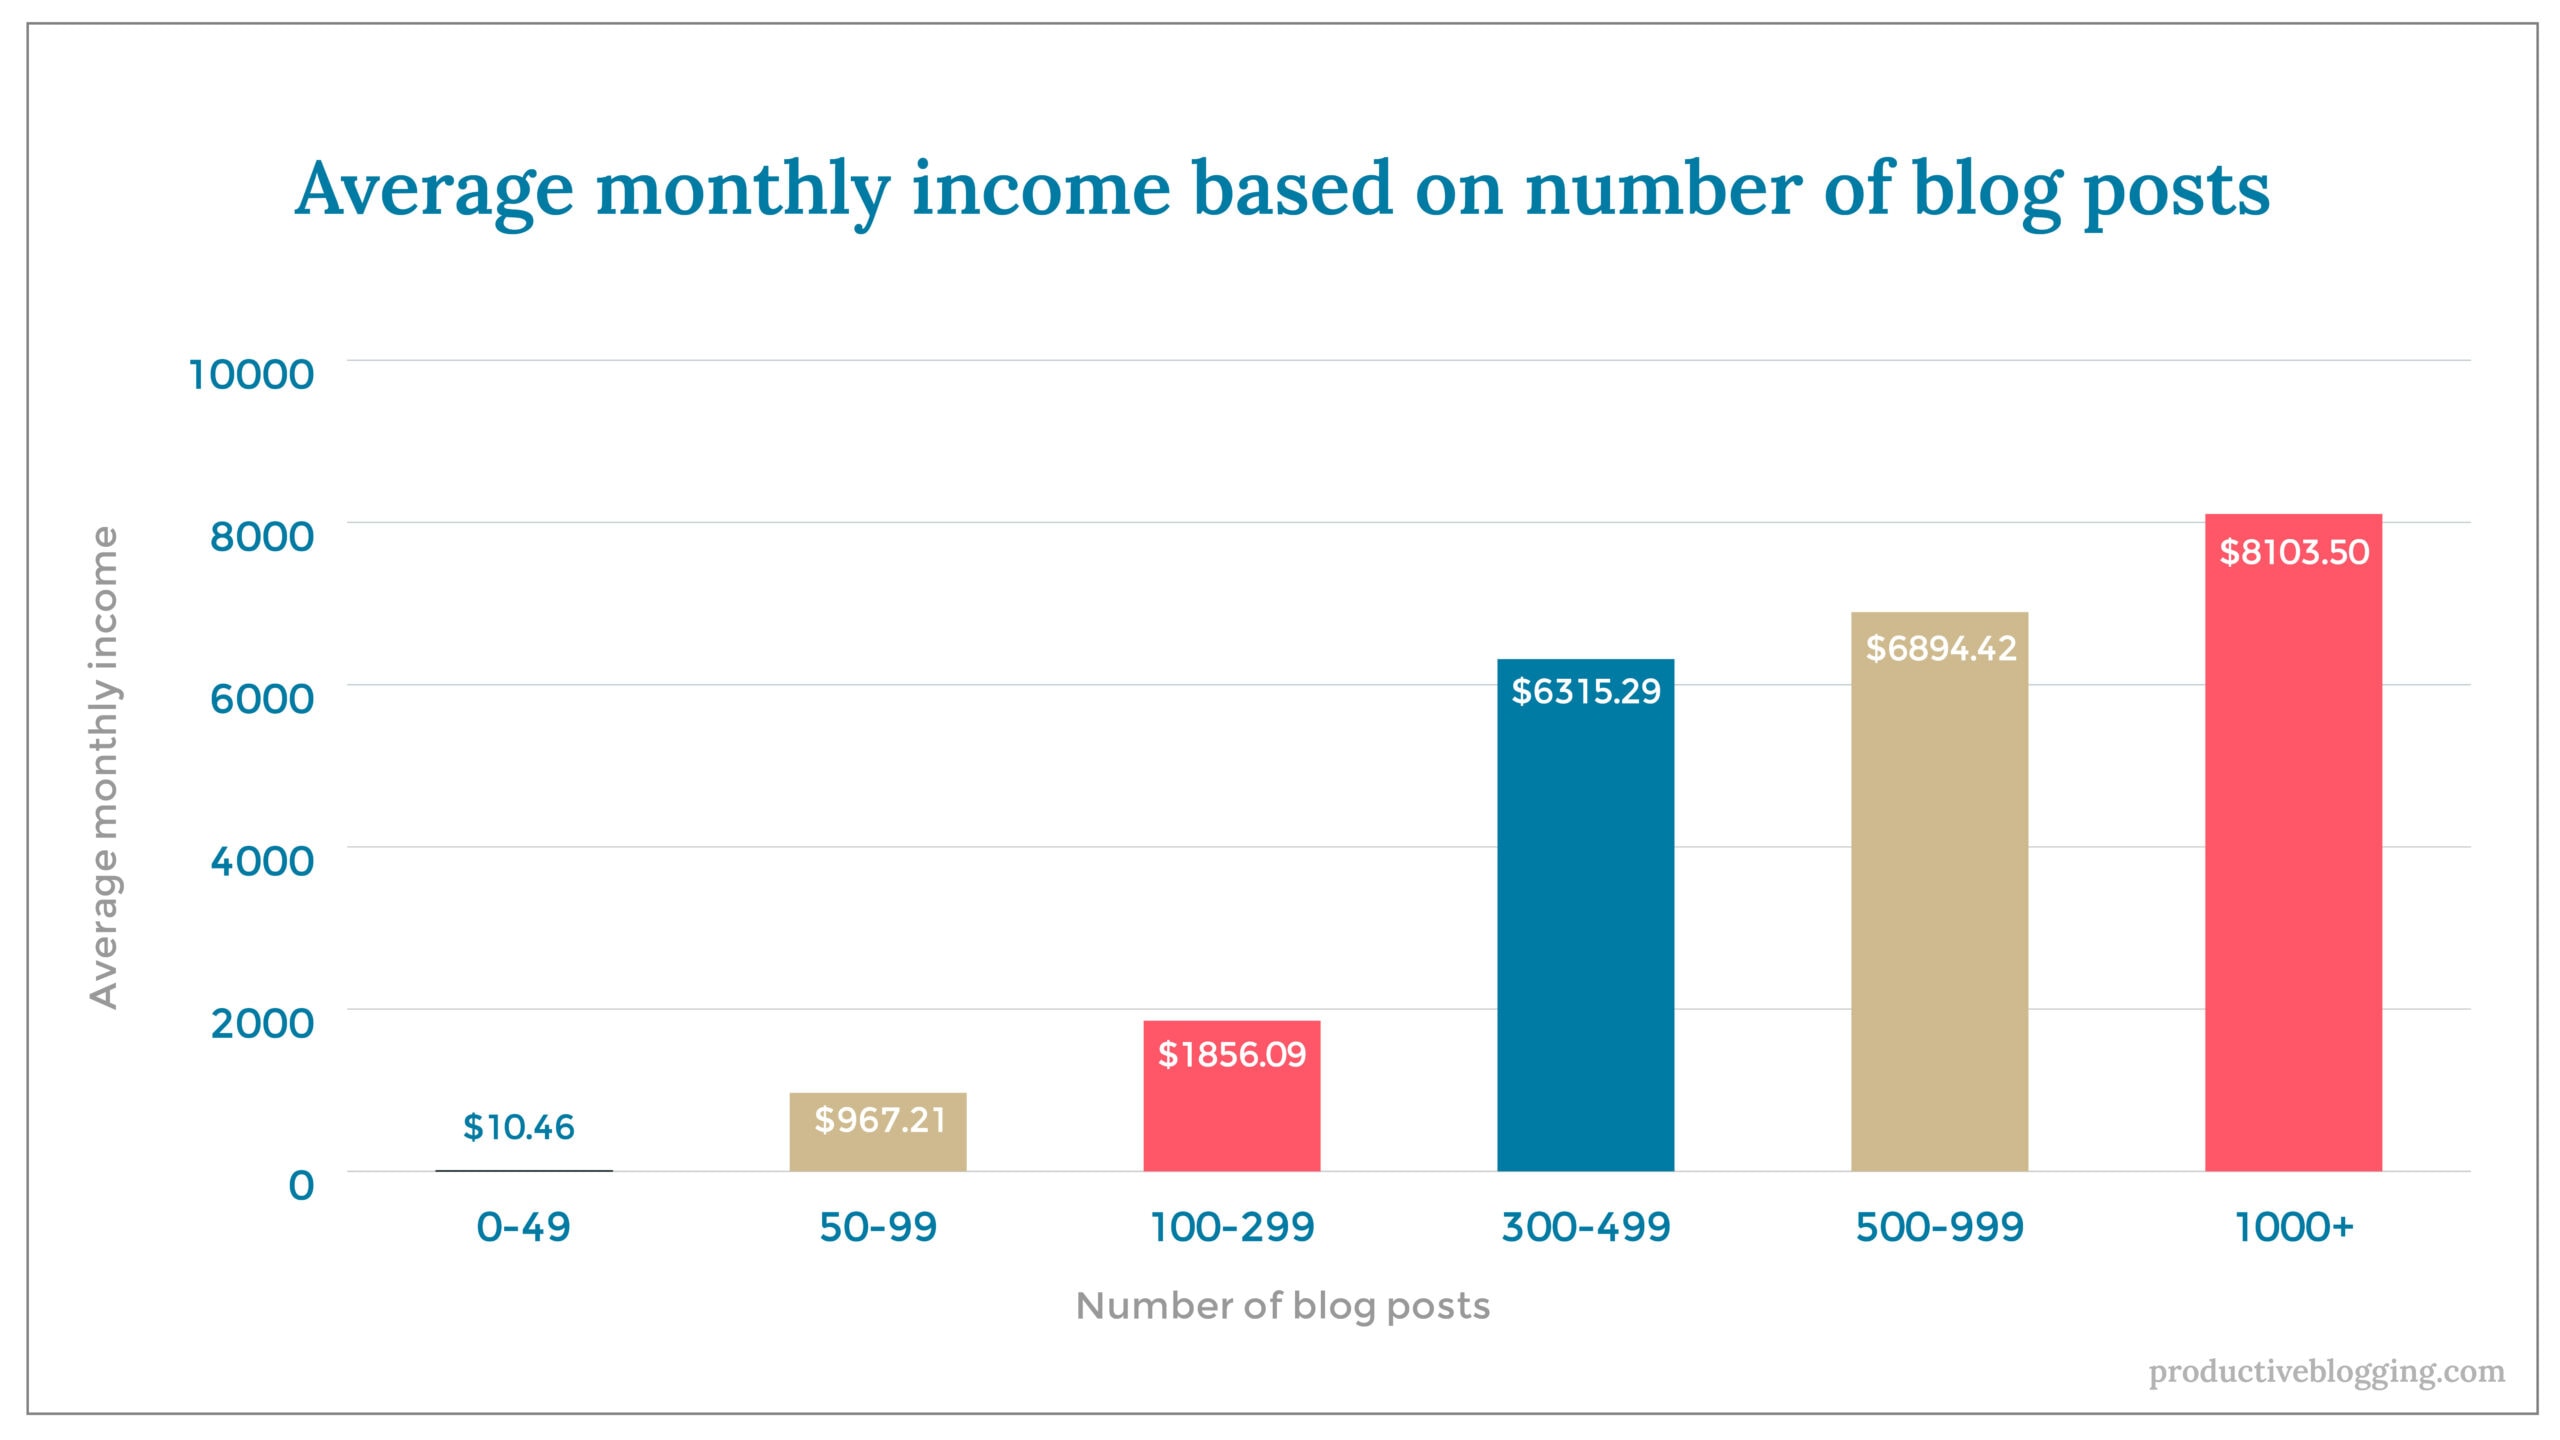 Average monthly income based on number of blog posts X axis: Number of blog posts Y axis: Average monthly income 0-49 $10.46 50-99 $967.21 100-299 $1856.09 300-499 $6315.29 500-999 $6894.42 1000+ $8103.50